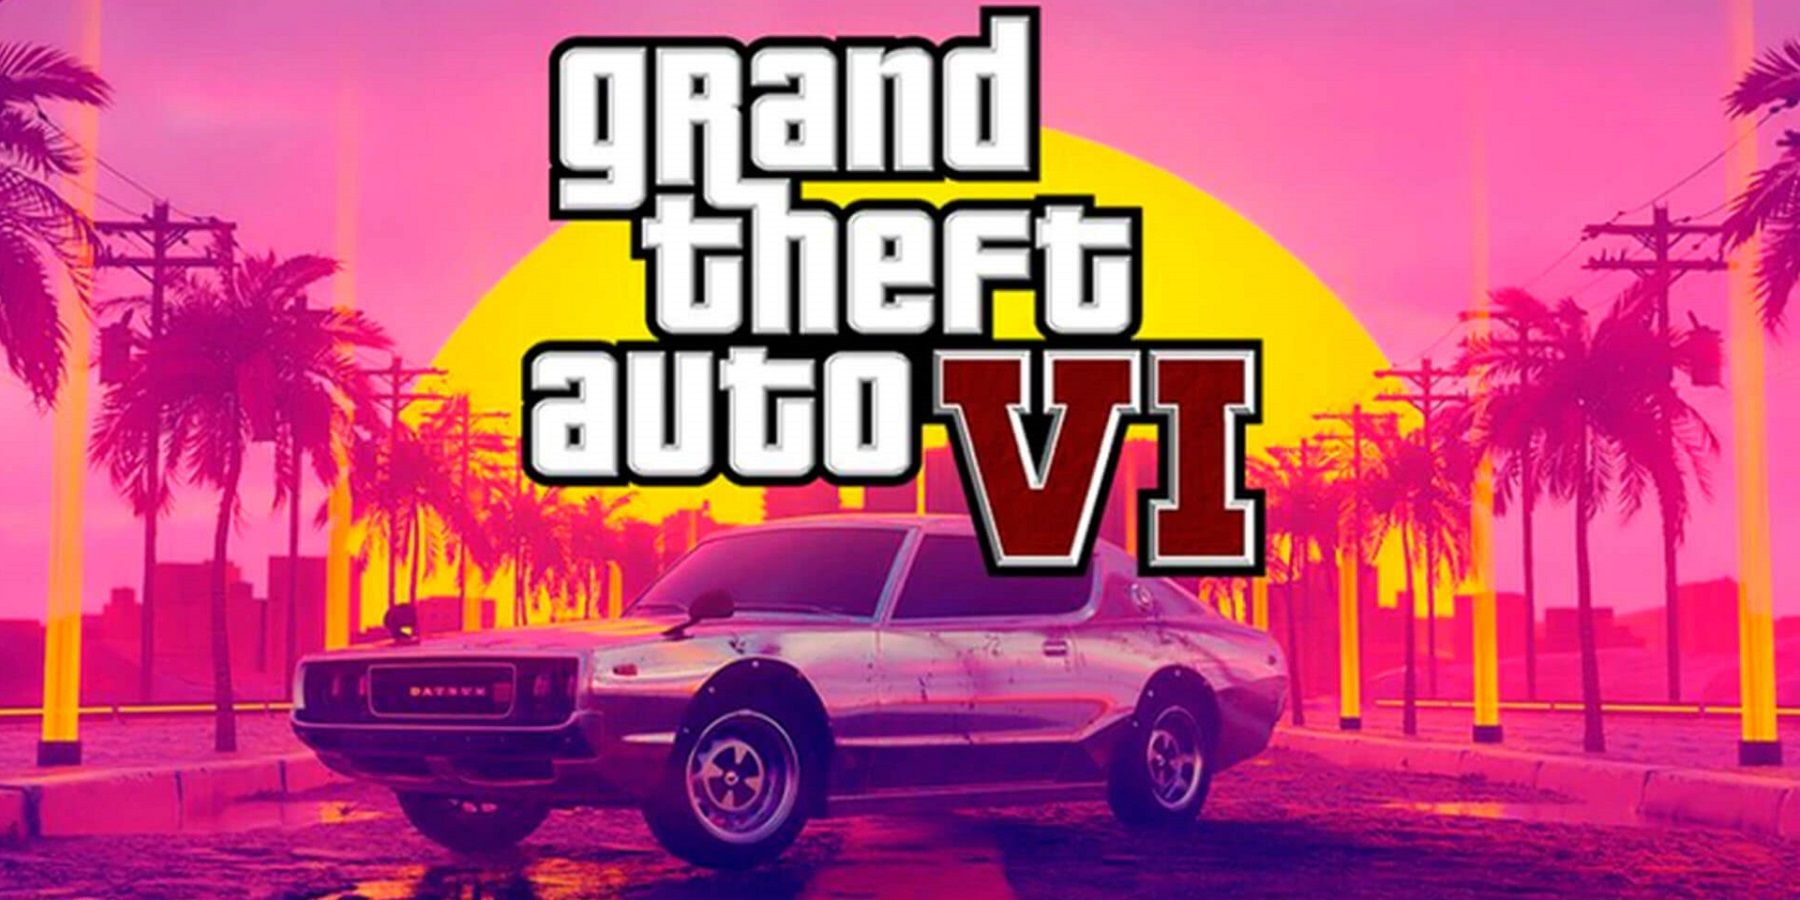 A mocked up Grand Theft Auto 6 logo with a car bathd in pink lighting in the background.